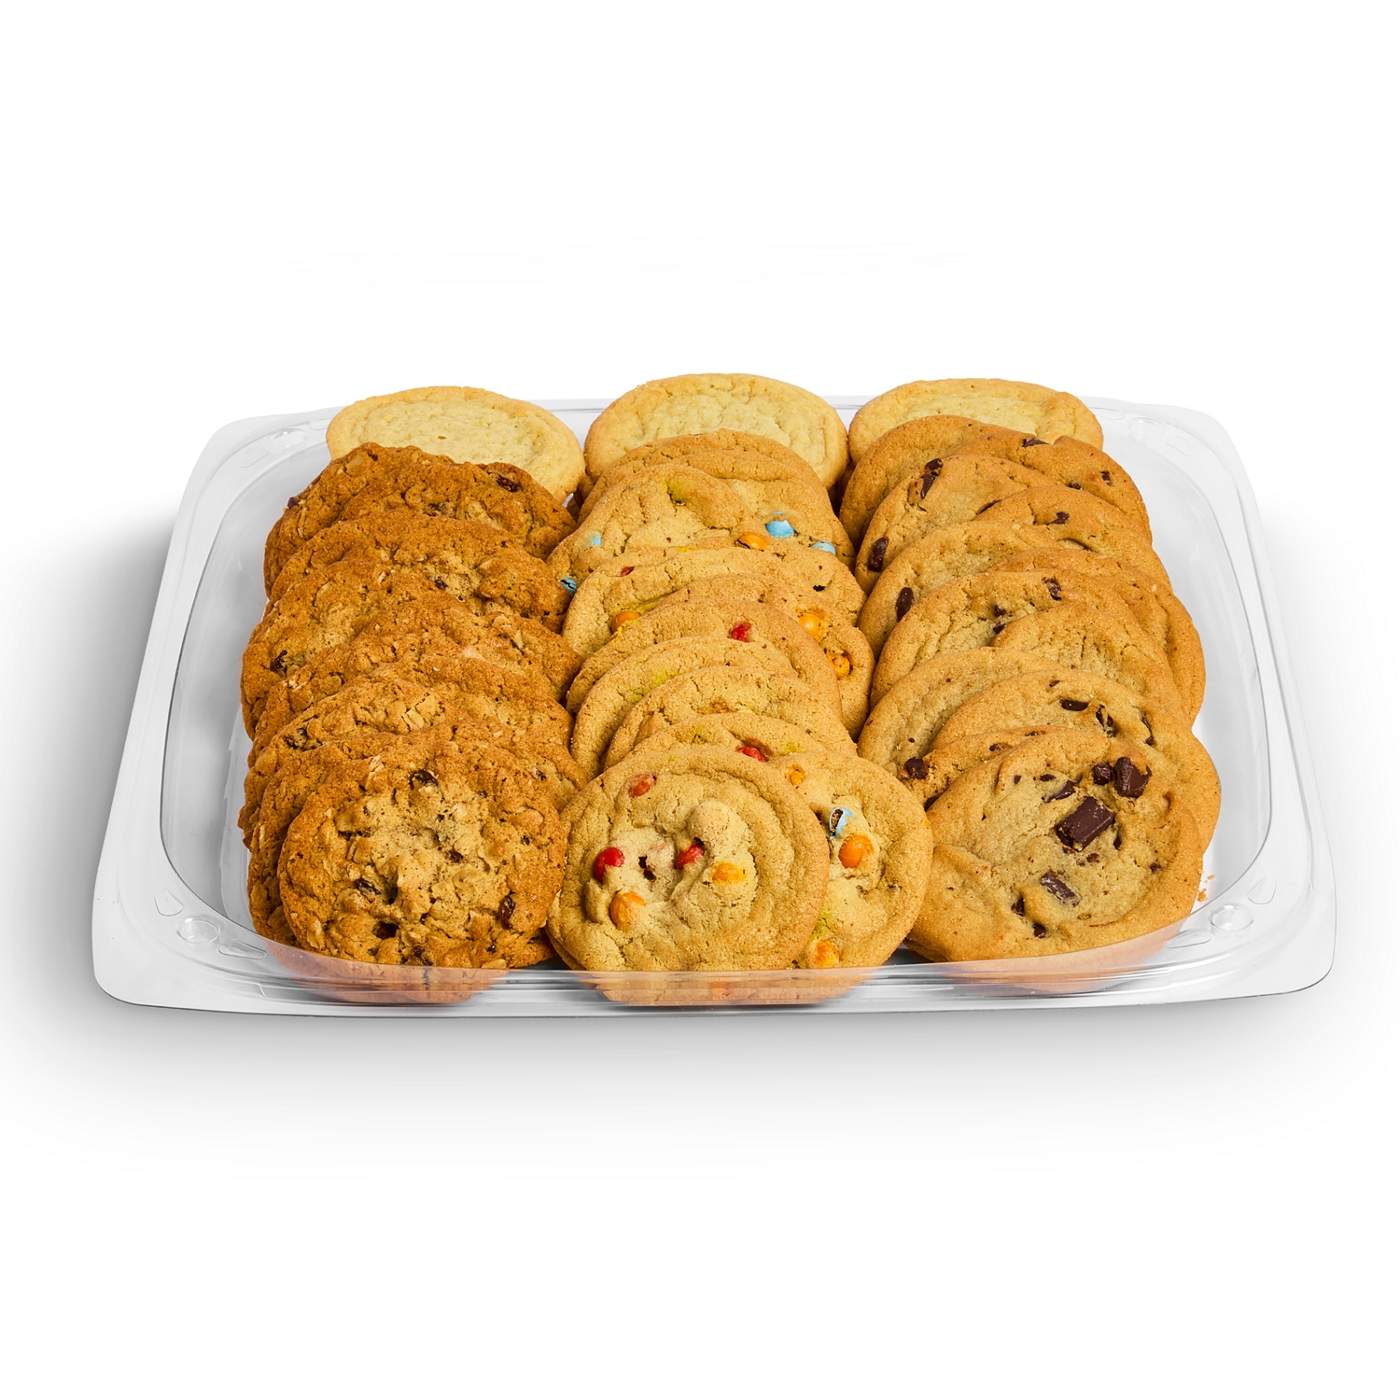 H-E-B Bakery Party Tray - Assorted Cookies; image 1 of 3